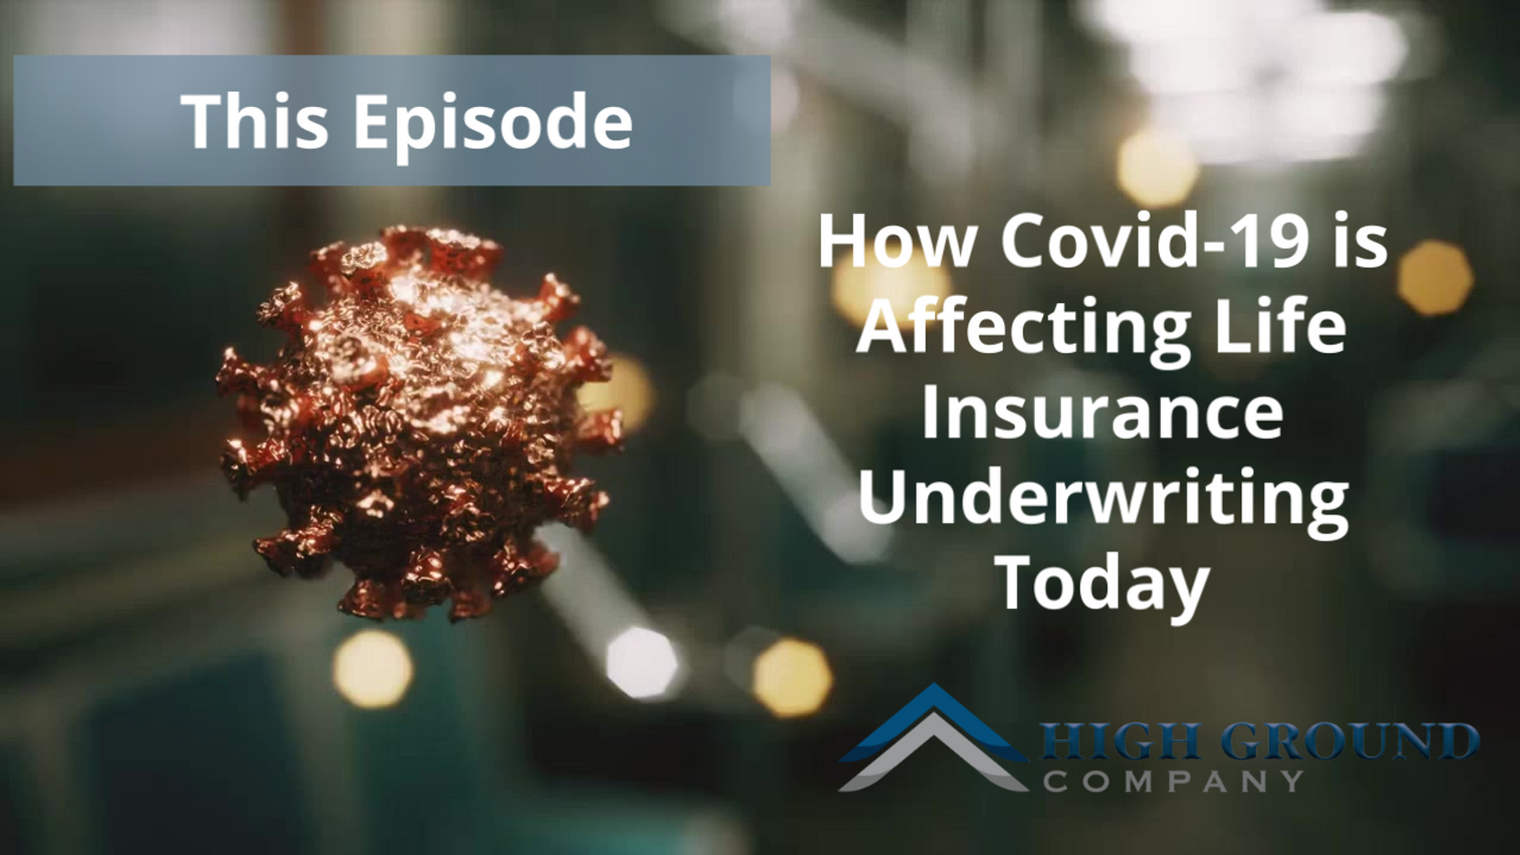 How Covid-19 is Affecting Life Insurance Underwriting Today